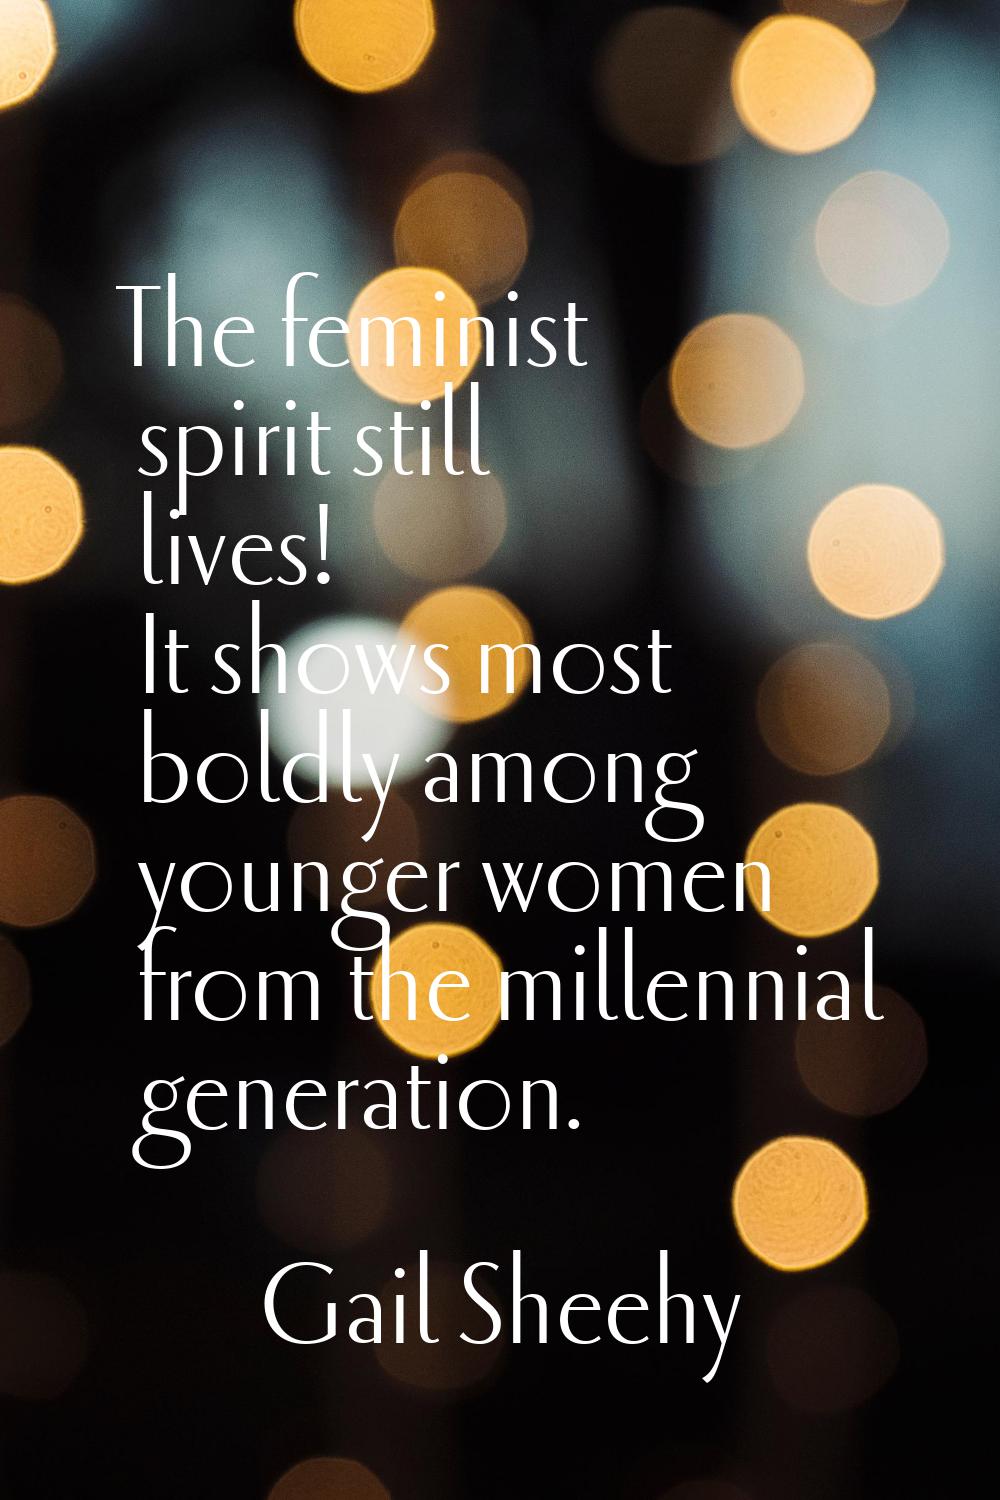 The feminist spirit still lives! It shows most boldly among younger women from the millennial gener